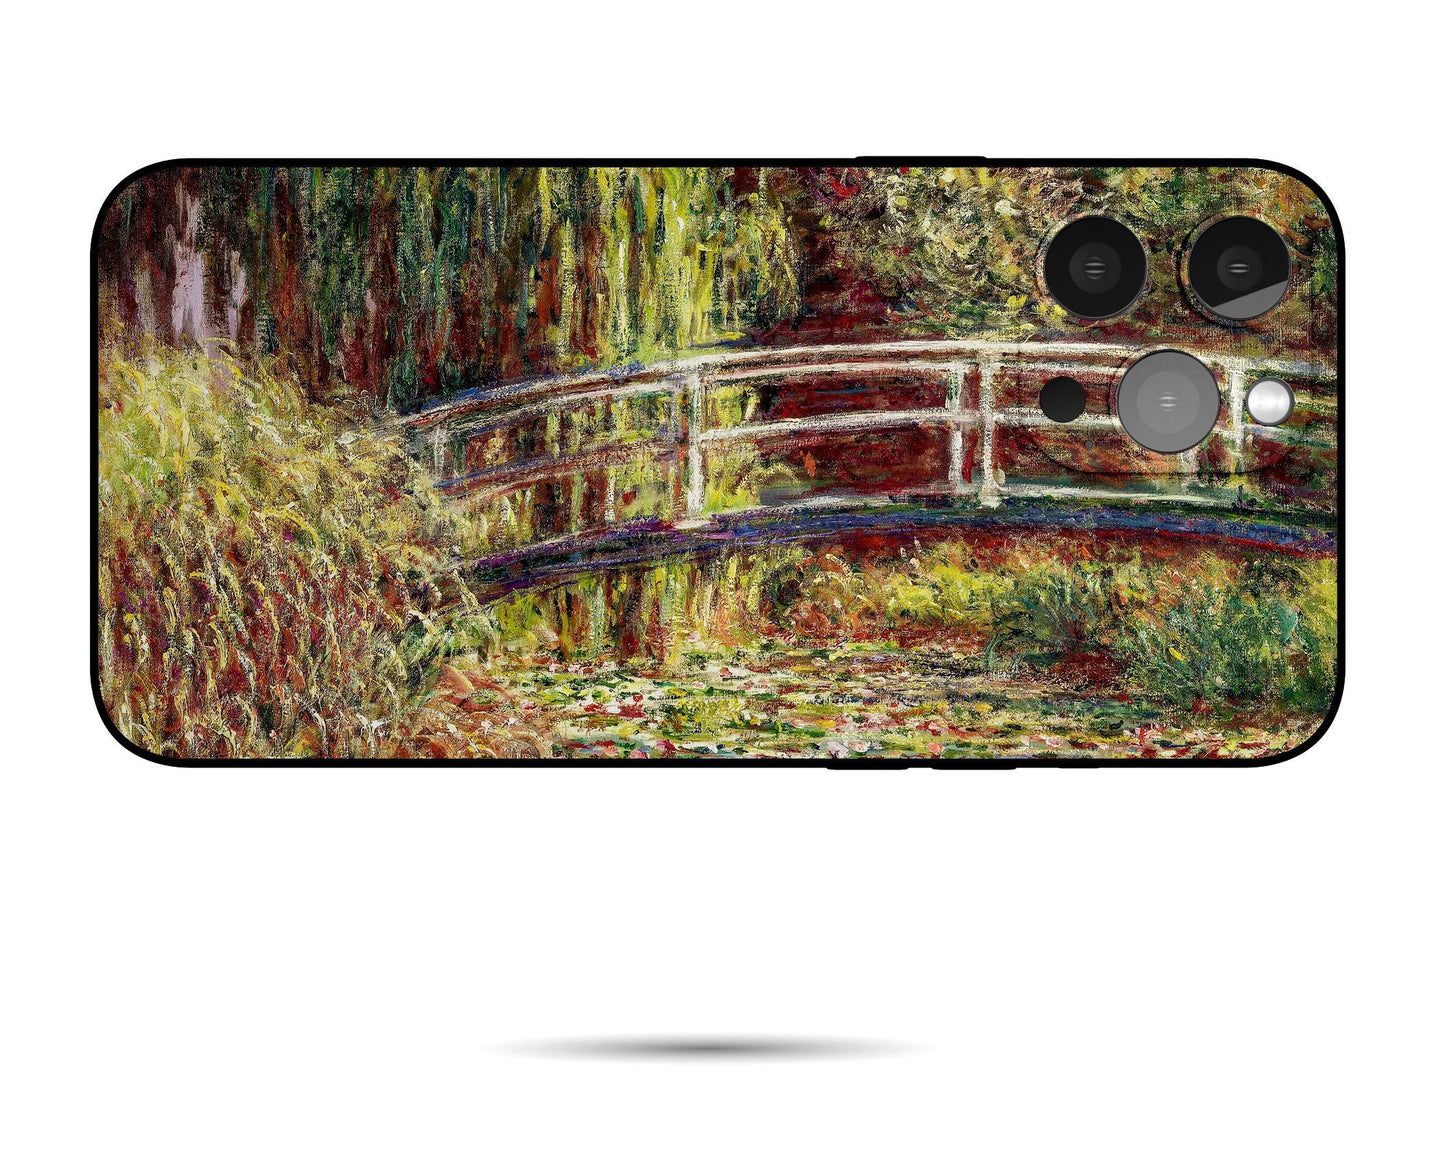 Claude Monet Japanese Bridge Over Waterlily Pond Iphone Cover, Designer Iphone Case, Iphone Case Protective, Iphone Case Silicone